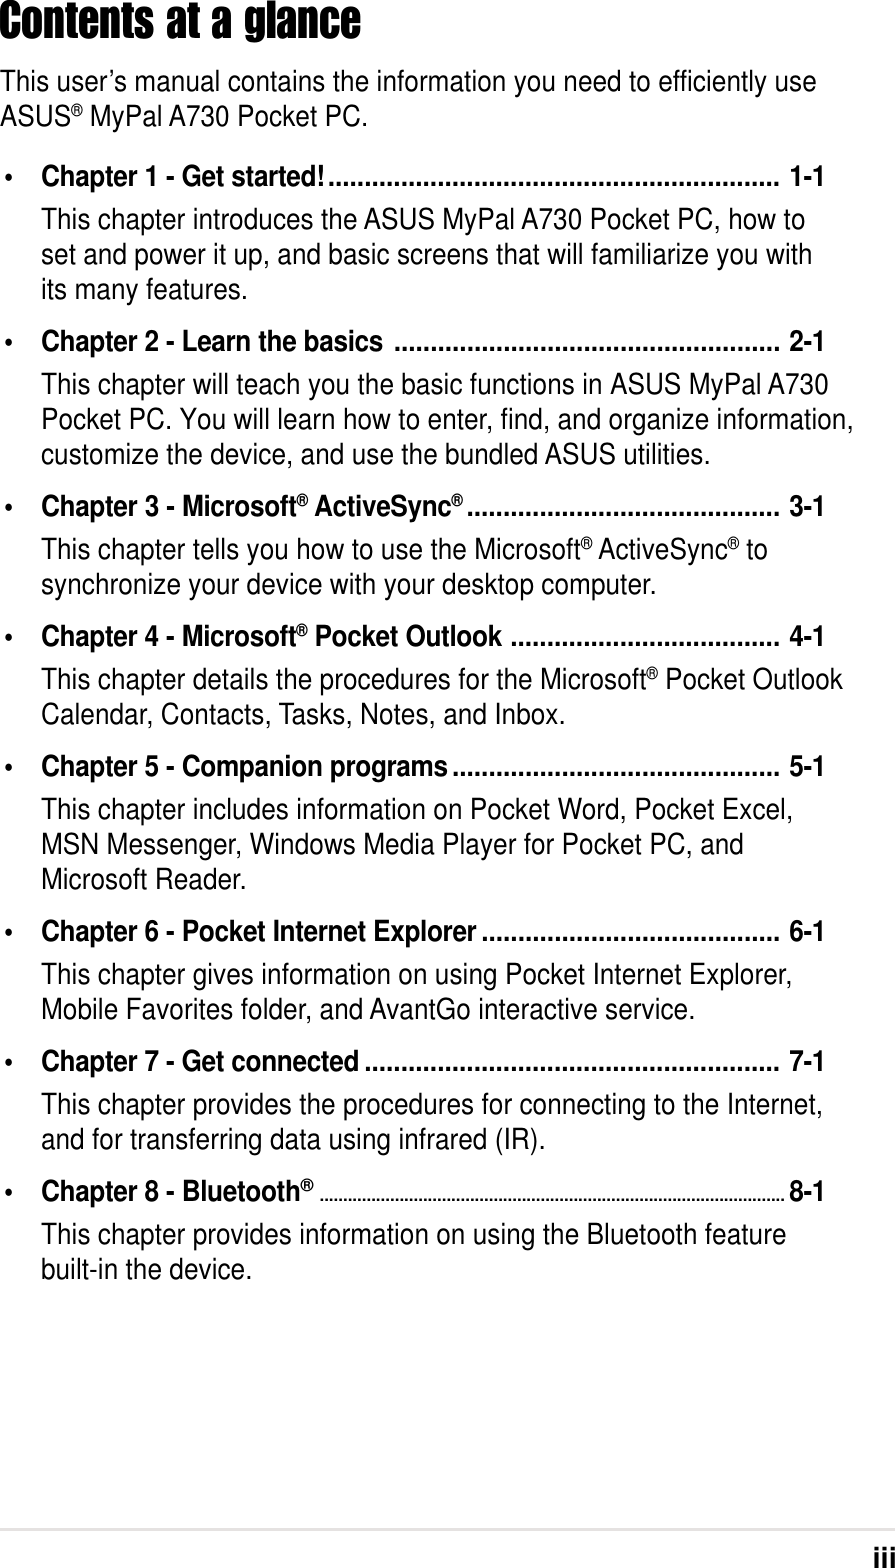 iiiContents at a glanceThis user’s manual contains the information you need to efficiently useASUS® MyPal A730 Pocket PC.• Chapter 1 - Get started!.............................................................. 1-1This chapter introduces the ASUS MyPal A730 Pocket PC, how toset and power it up, and basic screens that will familiarize you withits many features.• Chapter 2 - Learn the basics ..................................................... 2-1This chapter will teach you the basic functions in ASUS MyPal A730Pocket PC. You will learn how to enter, find, and organize information, customize the device, and use the bundled ASUS utilities.• Chapter 3 - Microsoft® ActiveSync®........................................... 3-1This chapter tells you how to use the Microsoft® ActiveSync® tosynchronize your device with your desktop computer.• Chapter 4 - Microsoft® Pocket Outlook ..................................... 4-1This chapter details the procedures for the Microsoft® Pocket OutlookCalendar, Contacts, Tasks, Notes, and Inbox.• Chapter 5 - Companion programs............................................. 5-1This chapter includes information on Pocket Word, Pocket Excel,MSN Messenger, Windows Media Player for Pocket PC, andMicrosoft Reader.• Chapter 6 - Pocket Internet Explorer ......................................... 6-1This chapter gives information on using Pocket Internet Explorer,Mobile Favorites folder, and AvantGo interactive service.• Chapter 7 - Get connected ......................................................... 7-1This chapter provides the procedures for connecting to the Internet,and for transferring data using infrared (IR).• Chapter 8 - Bluetooth®...................................................................................................8-1This chapter provides information on using the Bluetooth featurebuilt-in the device.